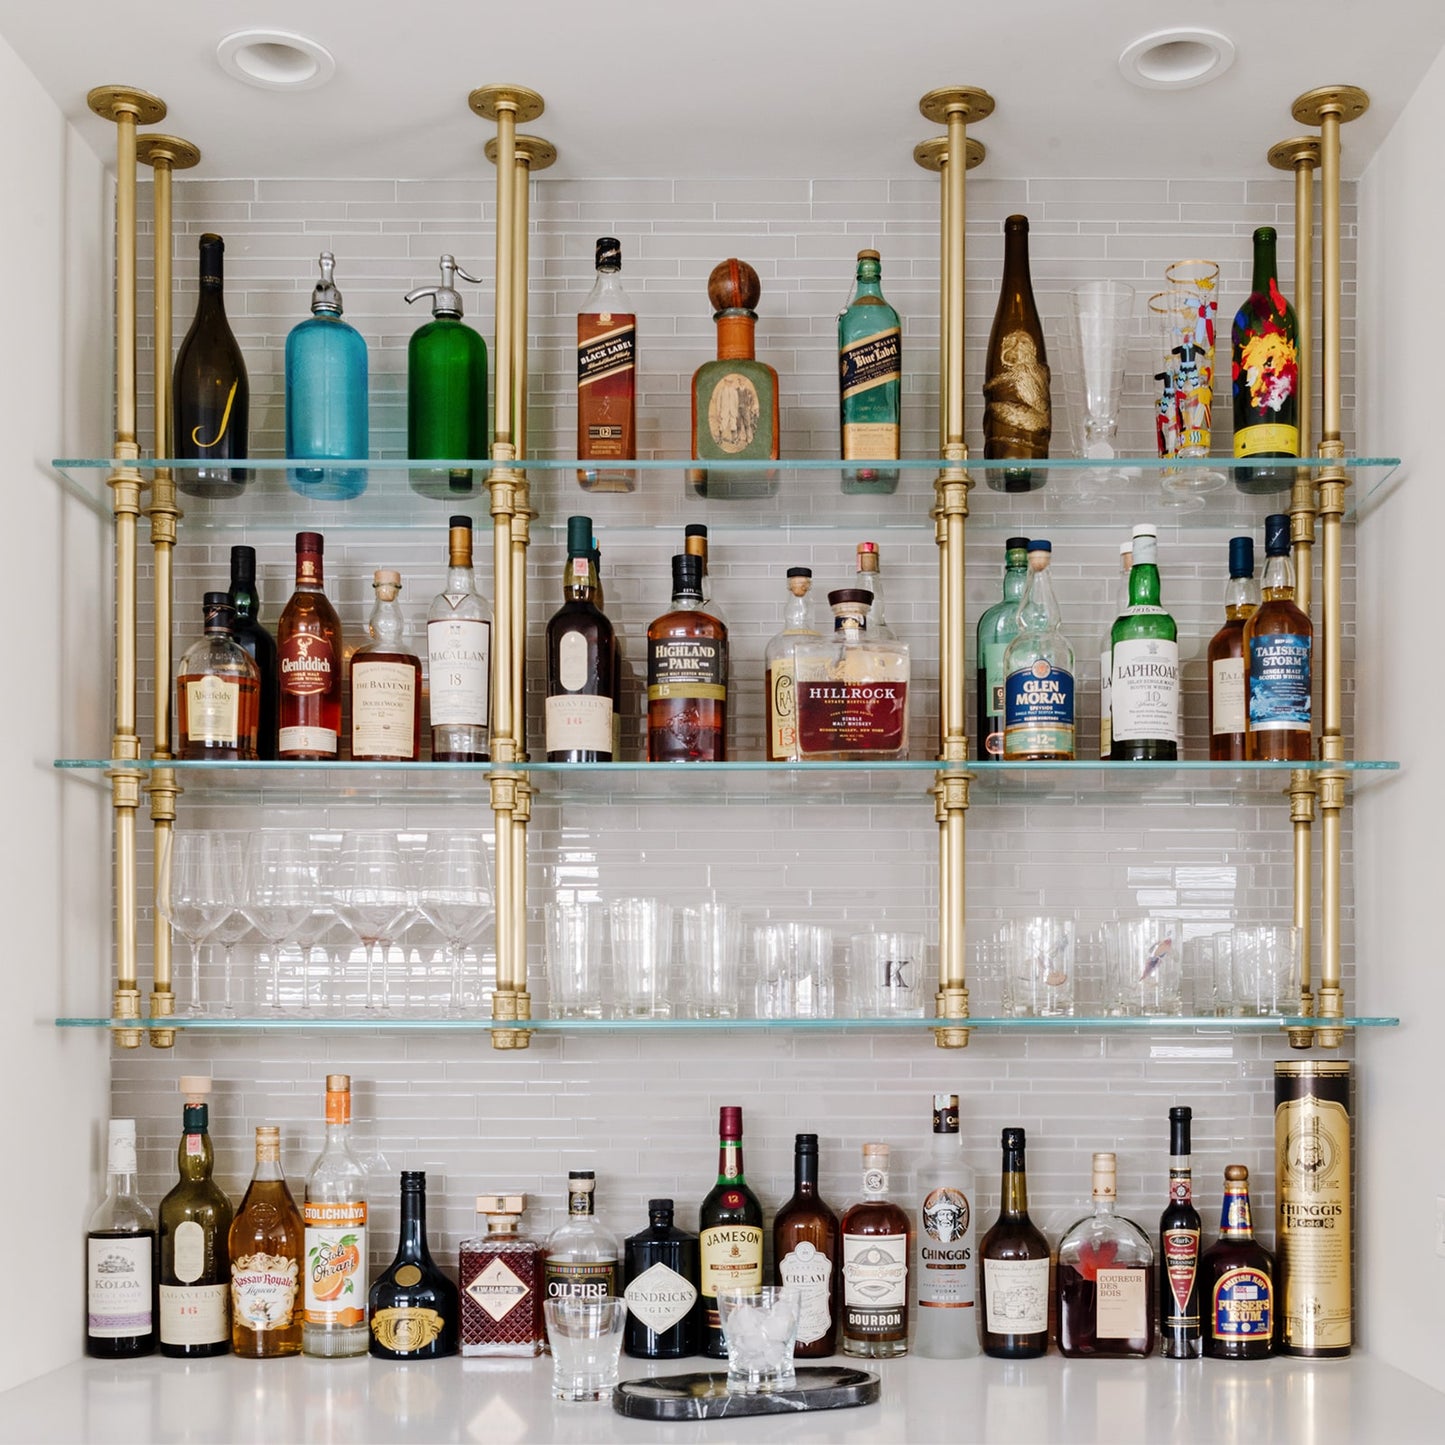 soil & oak ceiling mounted bar and kitchen shelving with brass plated pipes and glass shelves in white tiled bar